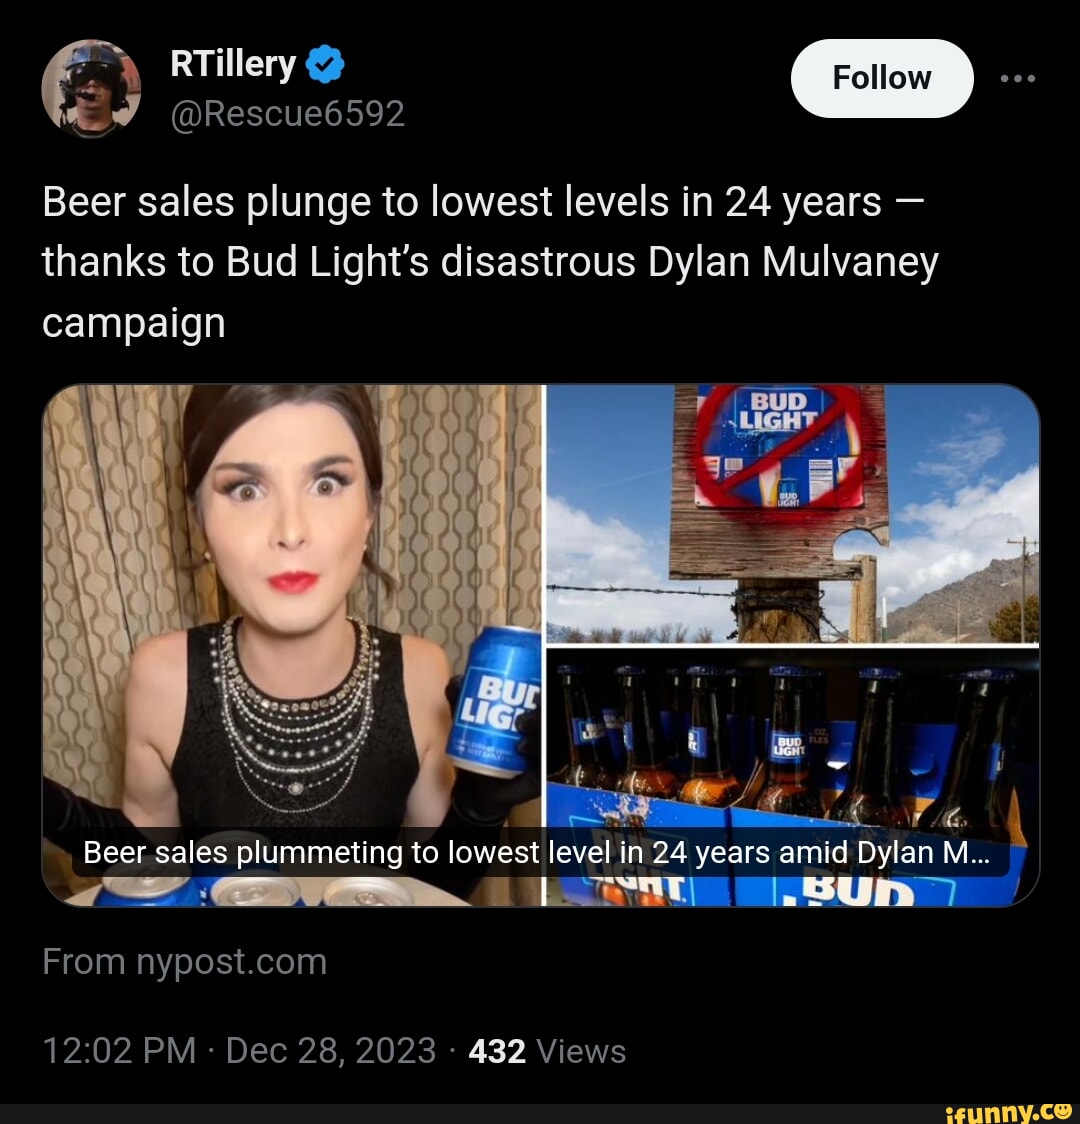 Beer sales plummeting to lowest level in 24 years amid Dylan Mulvaney fiasco